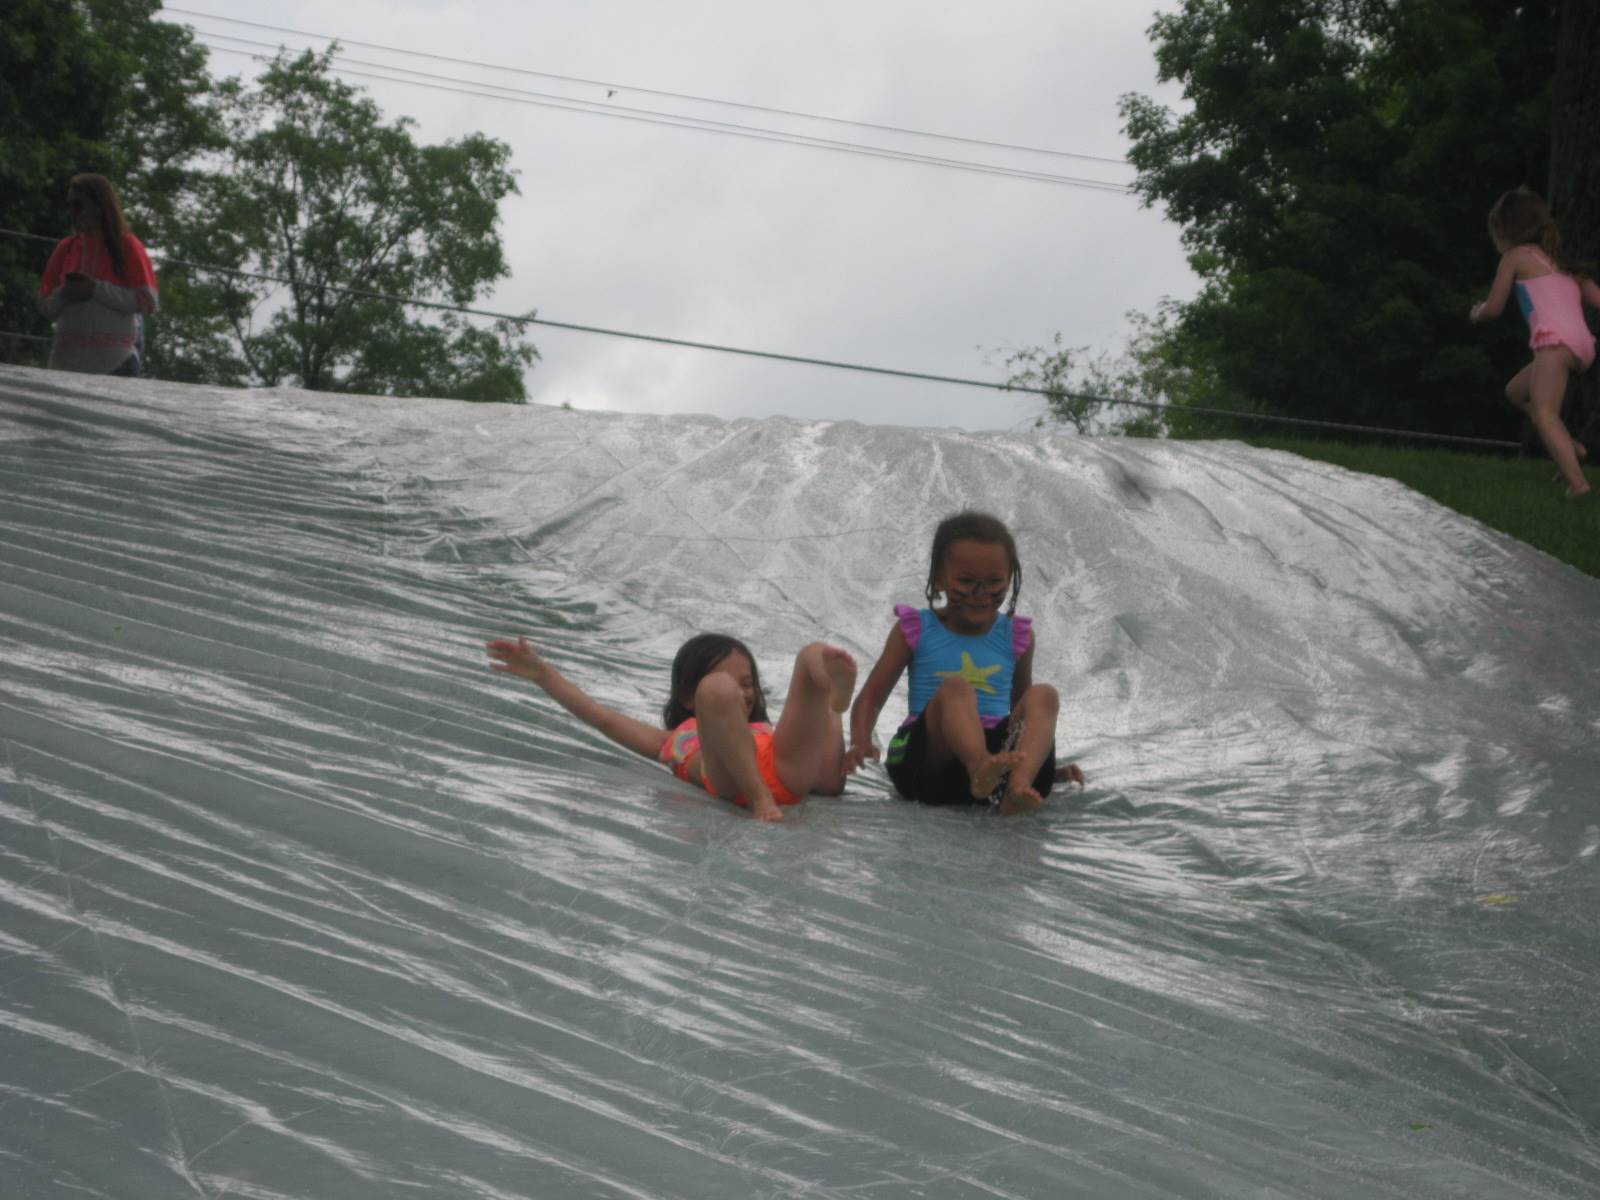 2 students on water slide